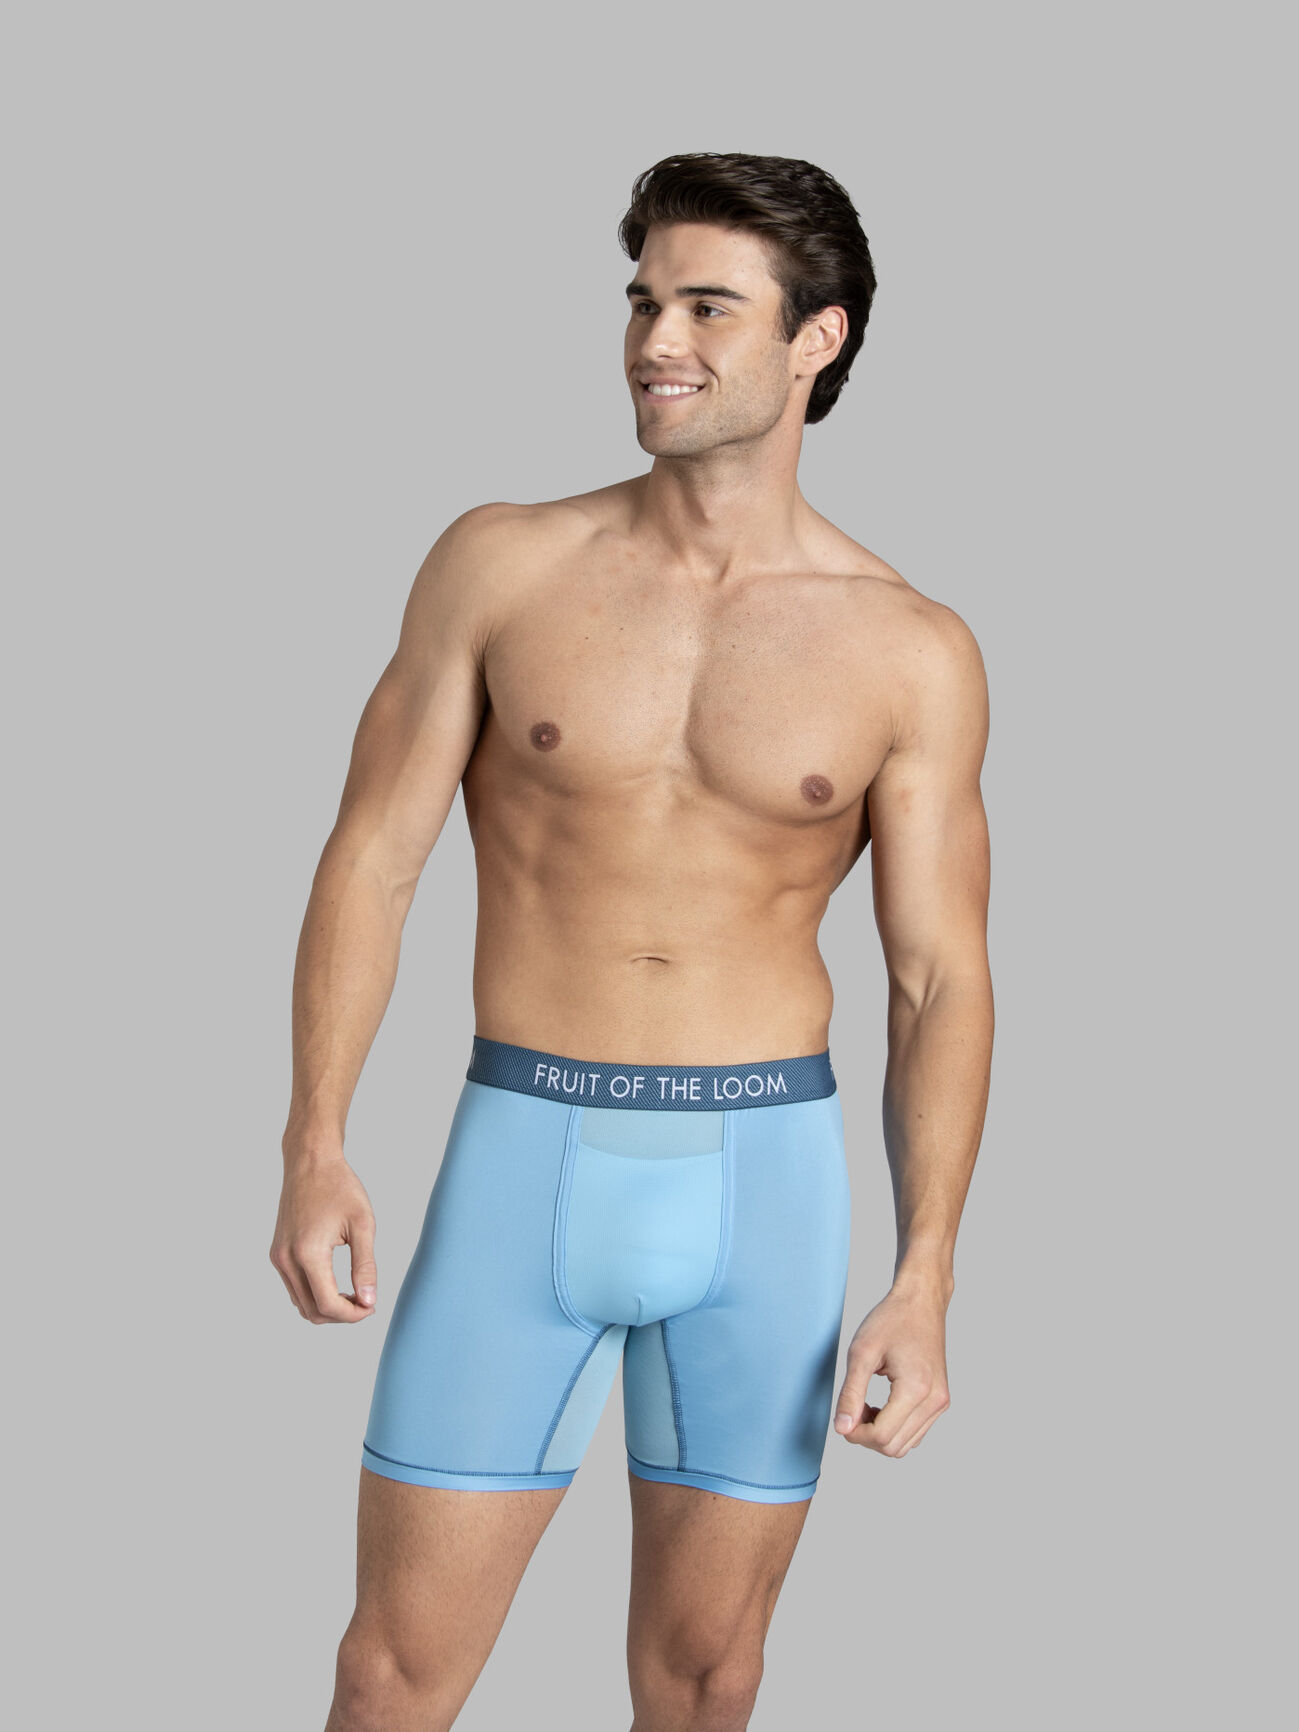 Men's Russell Athletic Underwear from $15